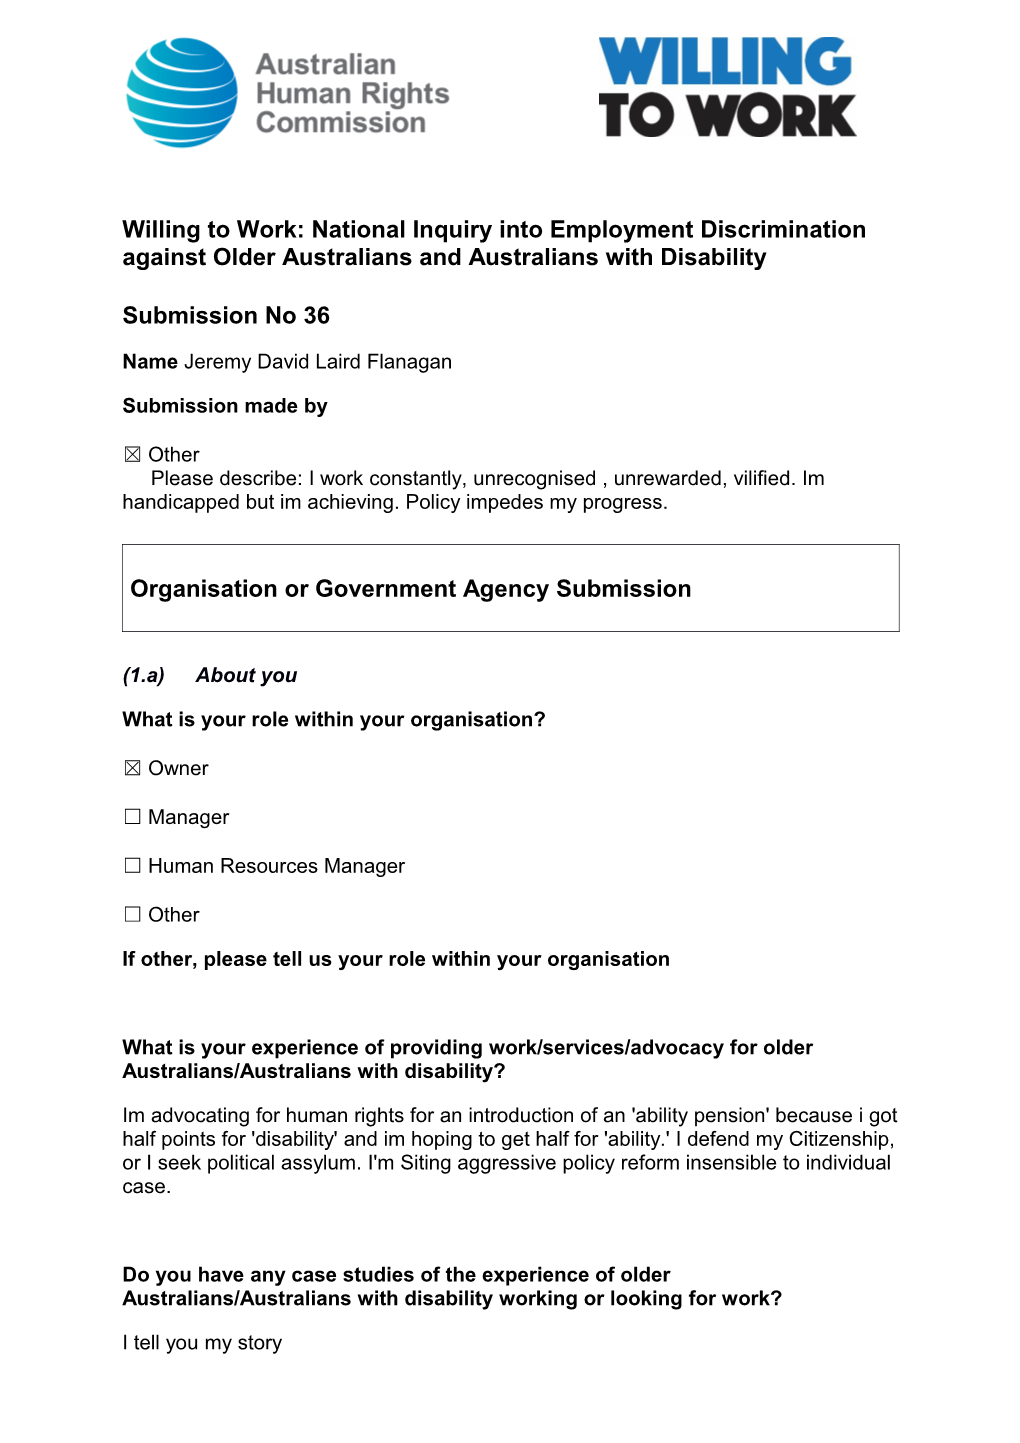 Willing to Work: National Inquiry Into Employment Discrimination Against Older Australians s3